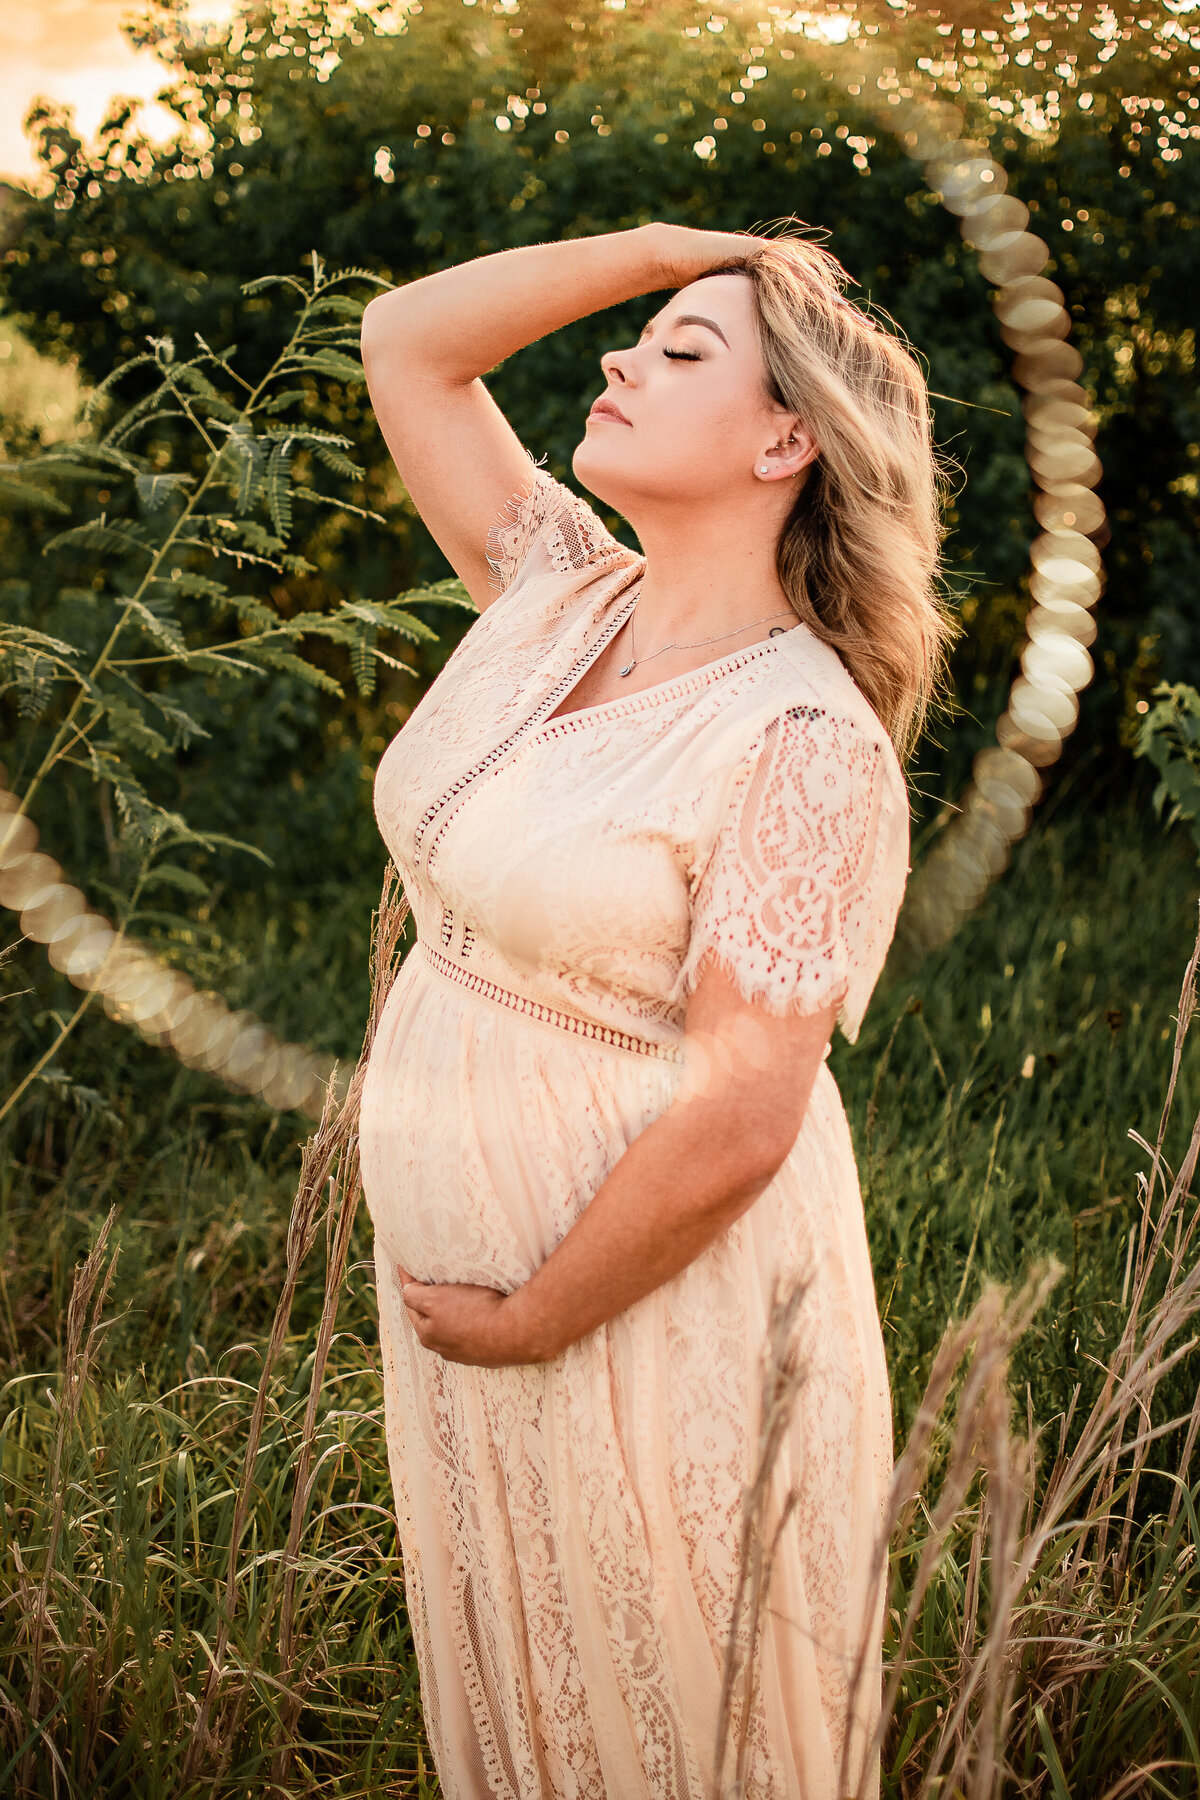 An expectant mother leans her head back and holds her belly with a golden sunset behind her.